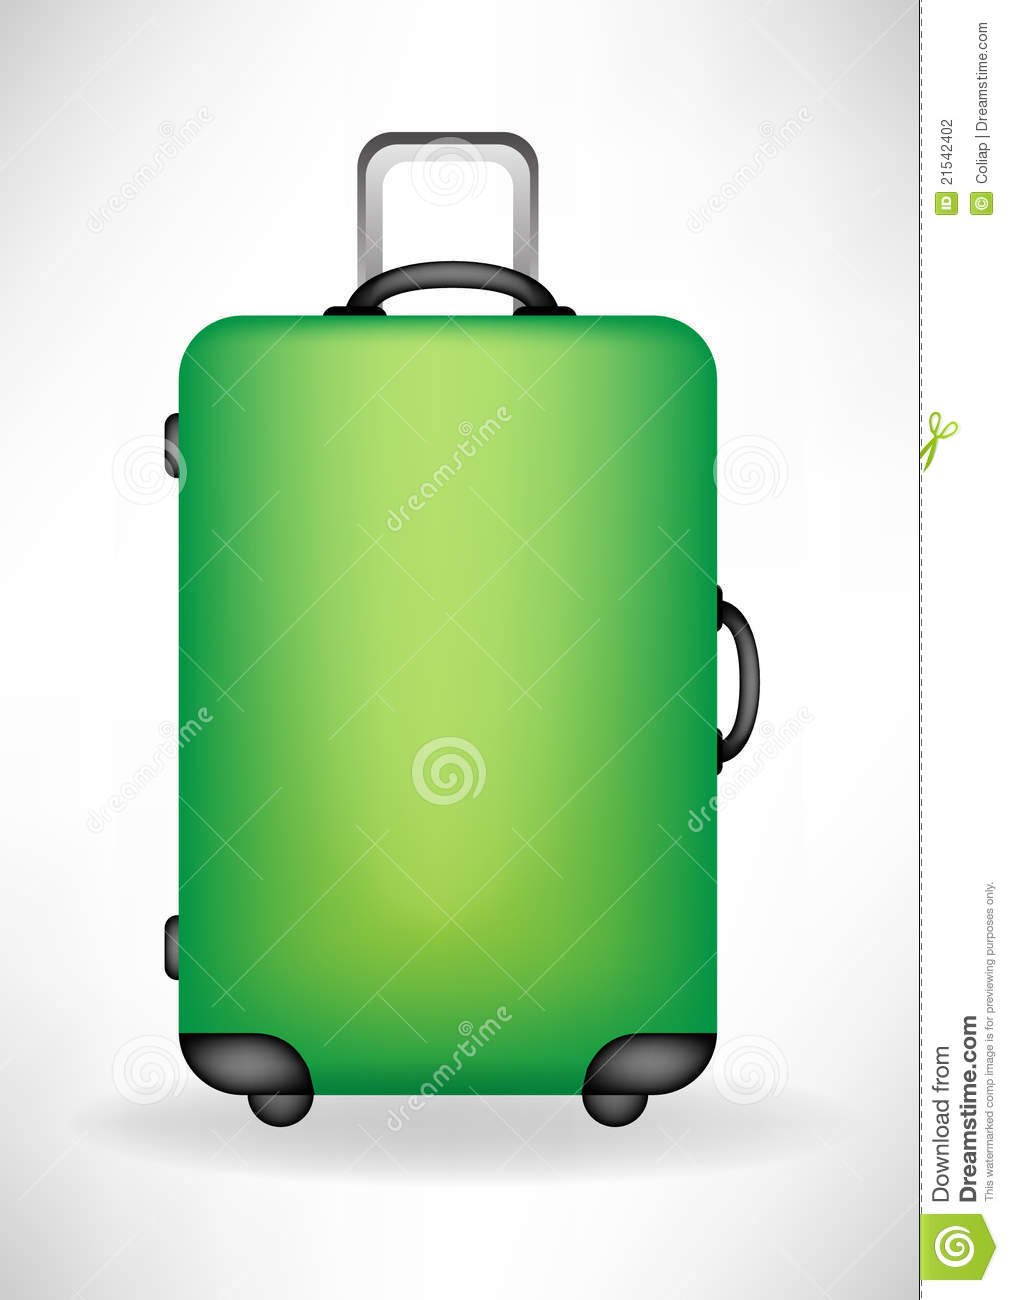 travel clipart luggage - photo #10